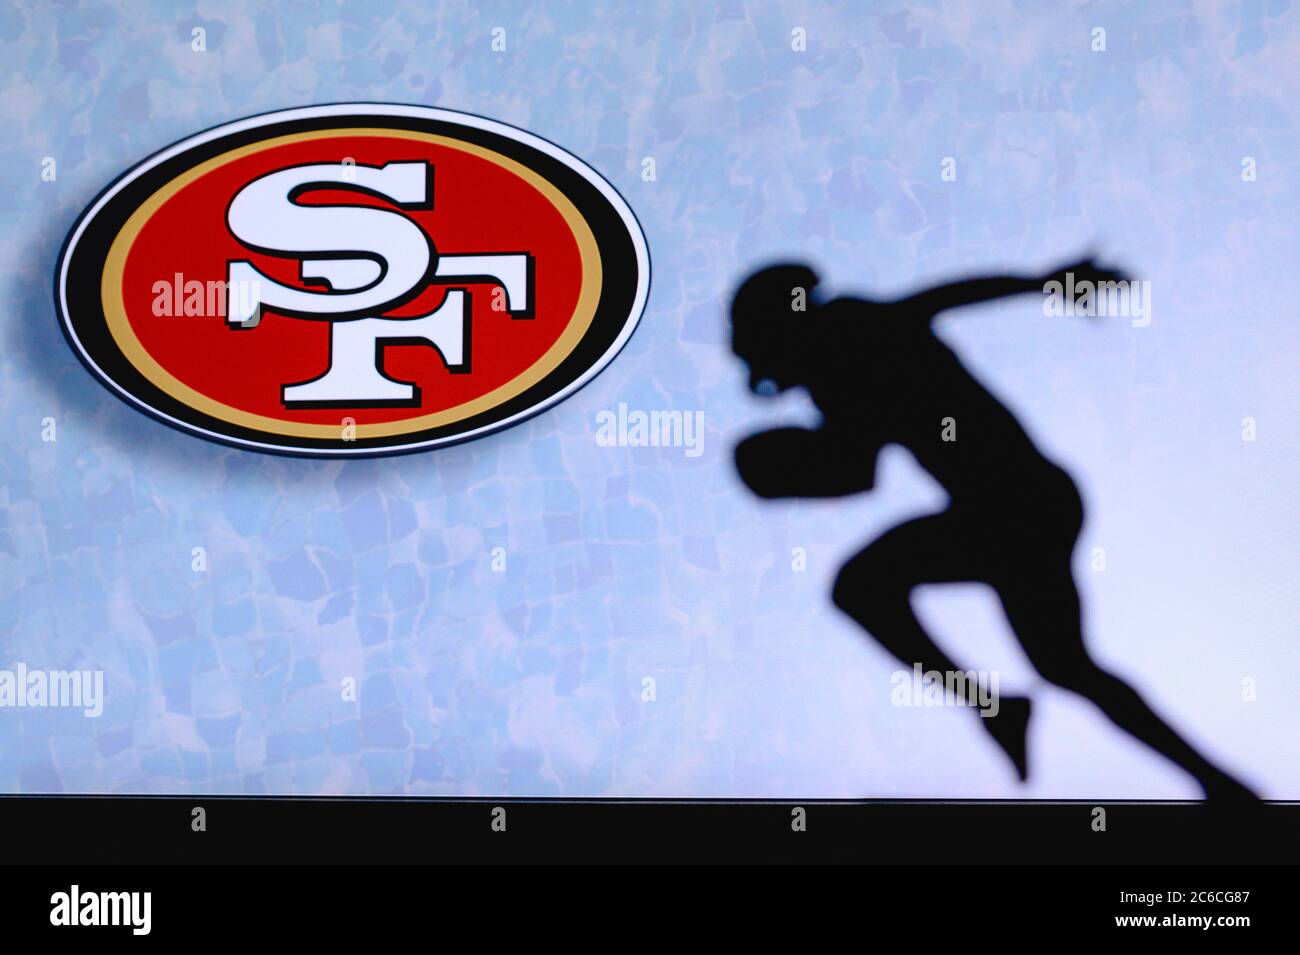 Pin by 49er D-signs on 49er Logos  49ers pictures, San francisco